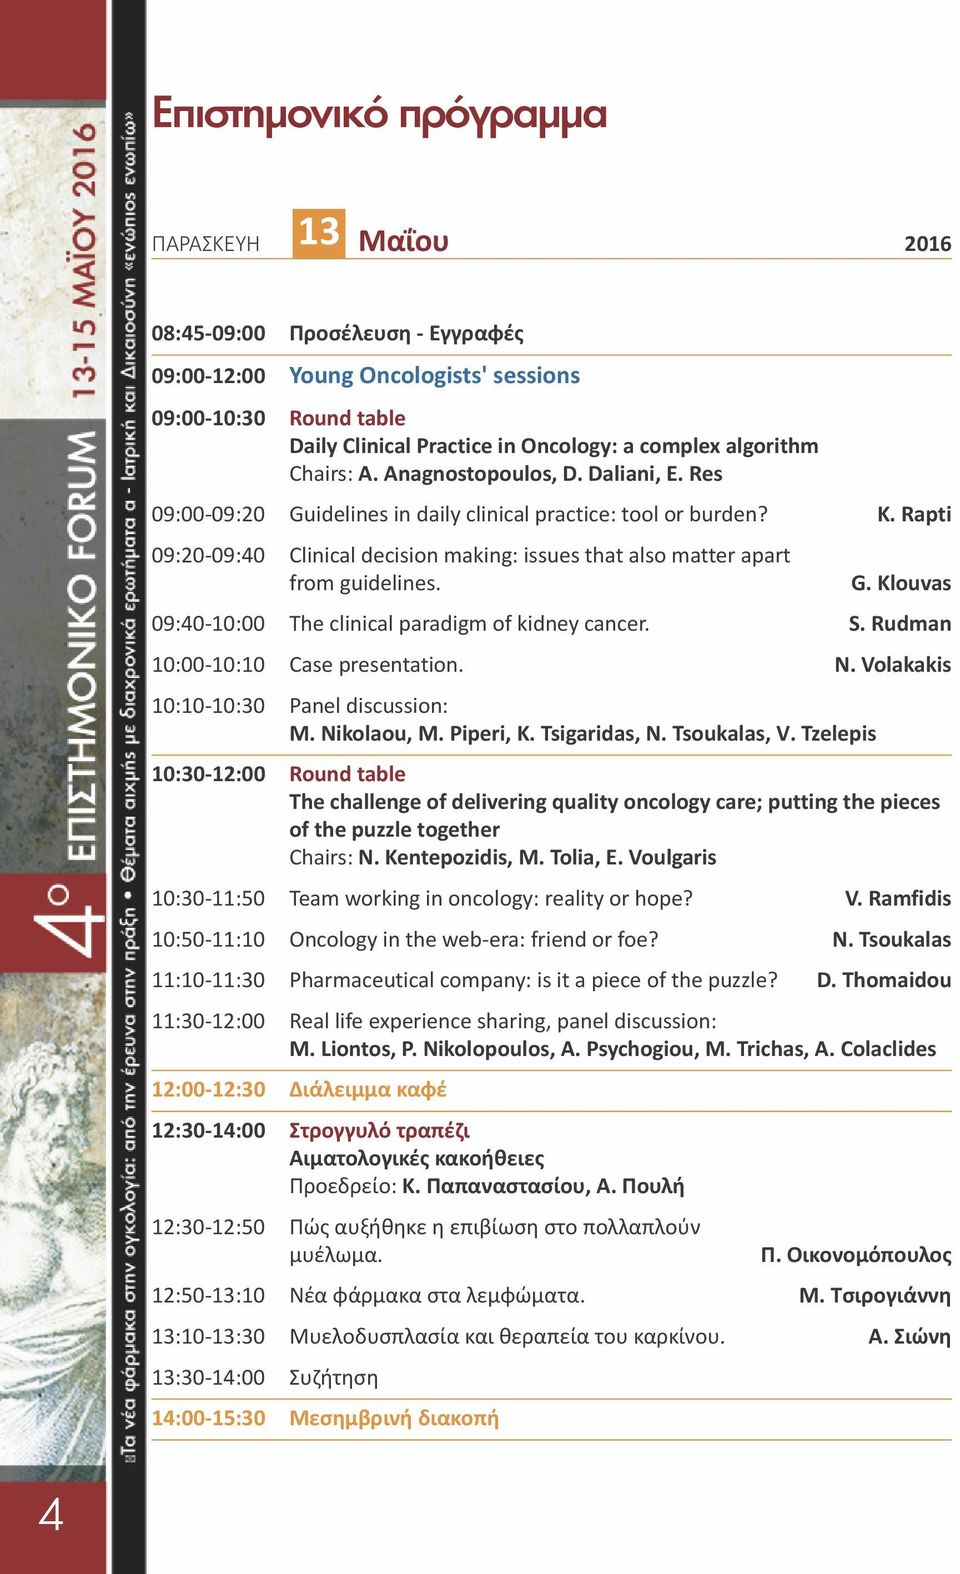 Rapti 09:20 09:40 Clinical decision making: issues that also matter apart from guidelines. G. Klouvas 09:40 10:00 The clinical paradigm of kidney cancer. S. Rudman 10:00 10:10 Case presentation. N.